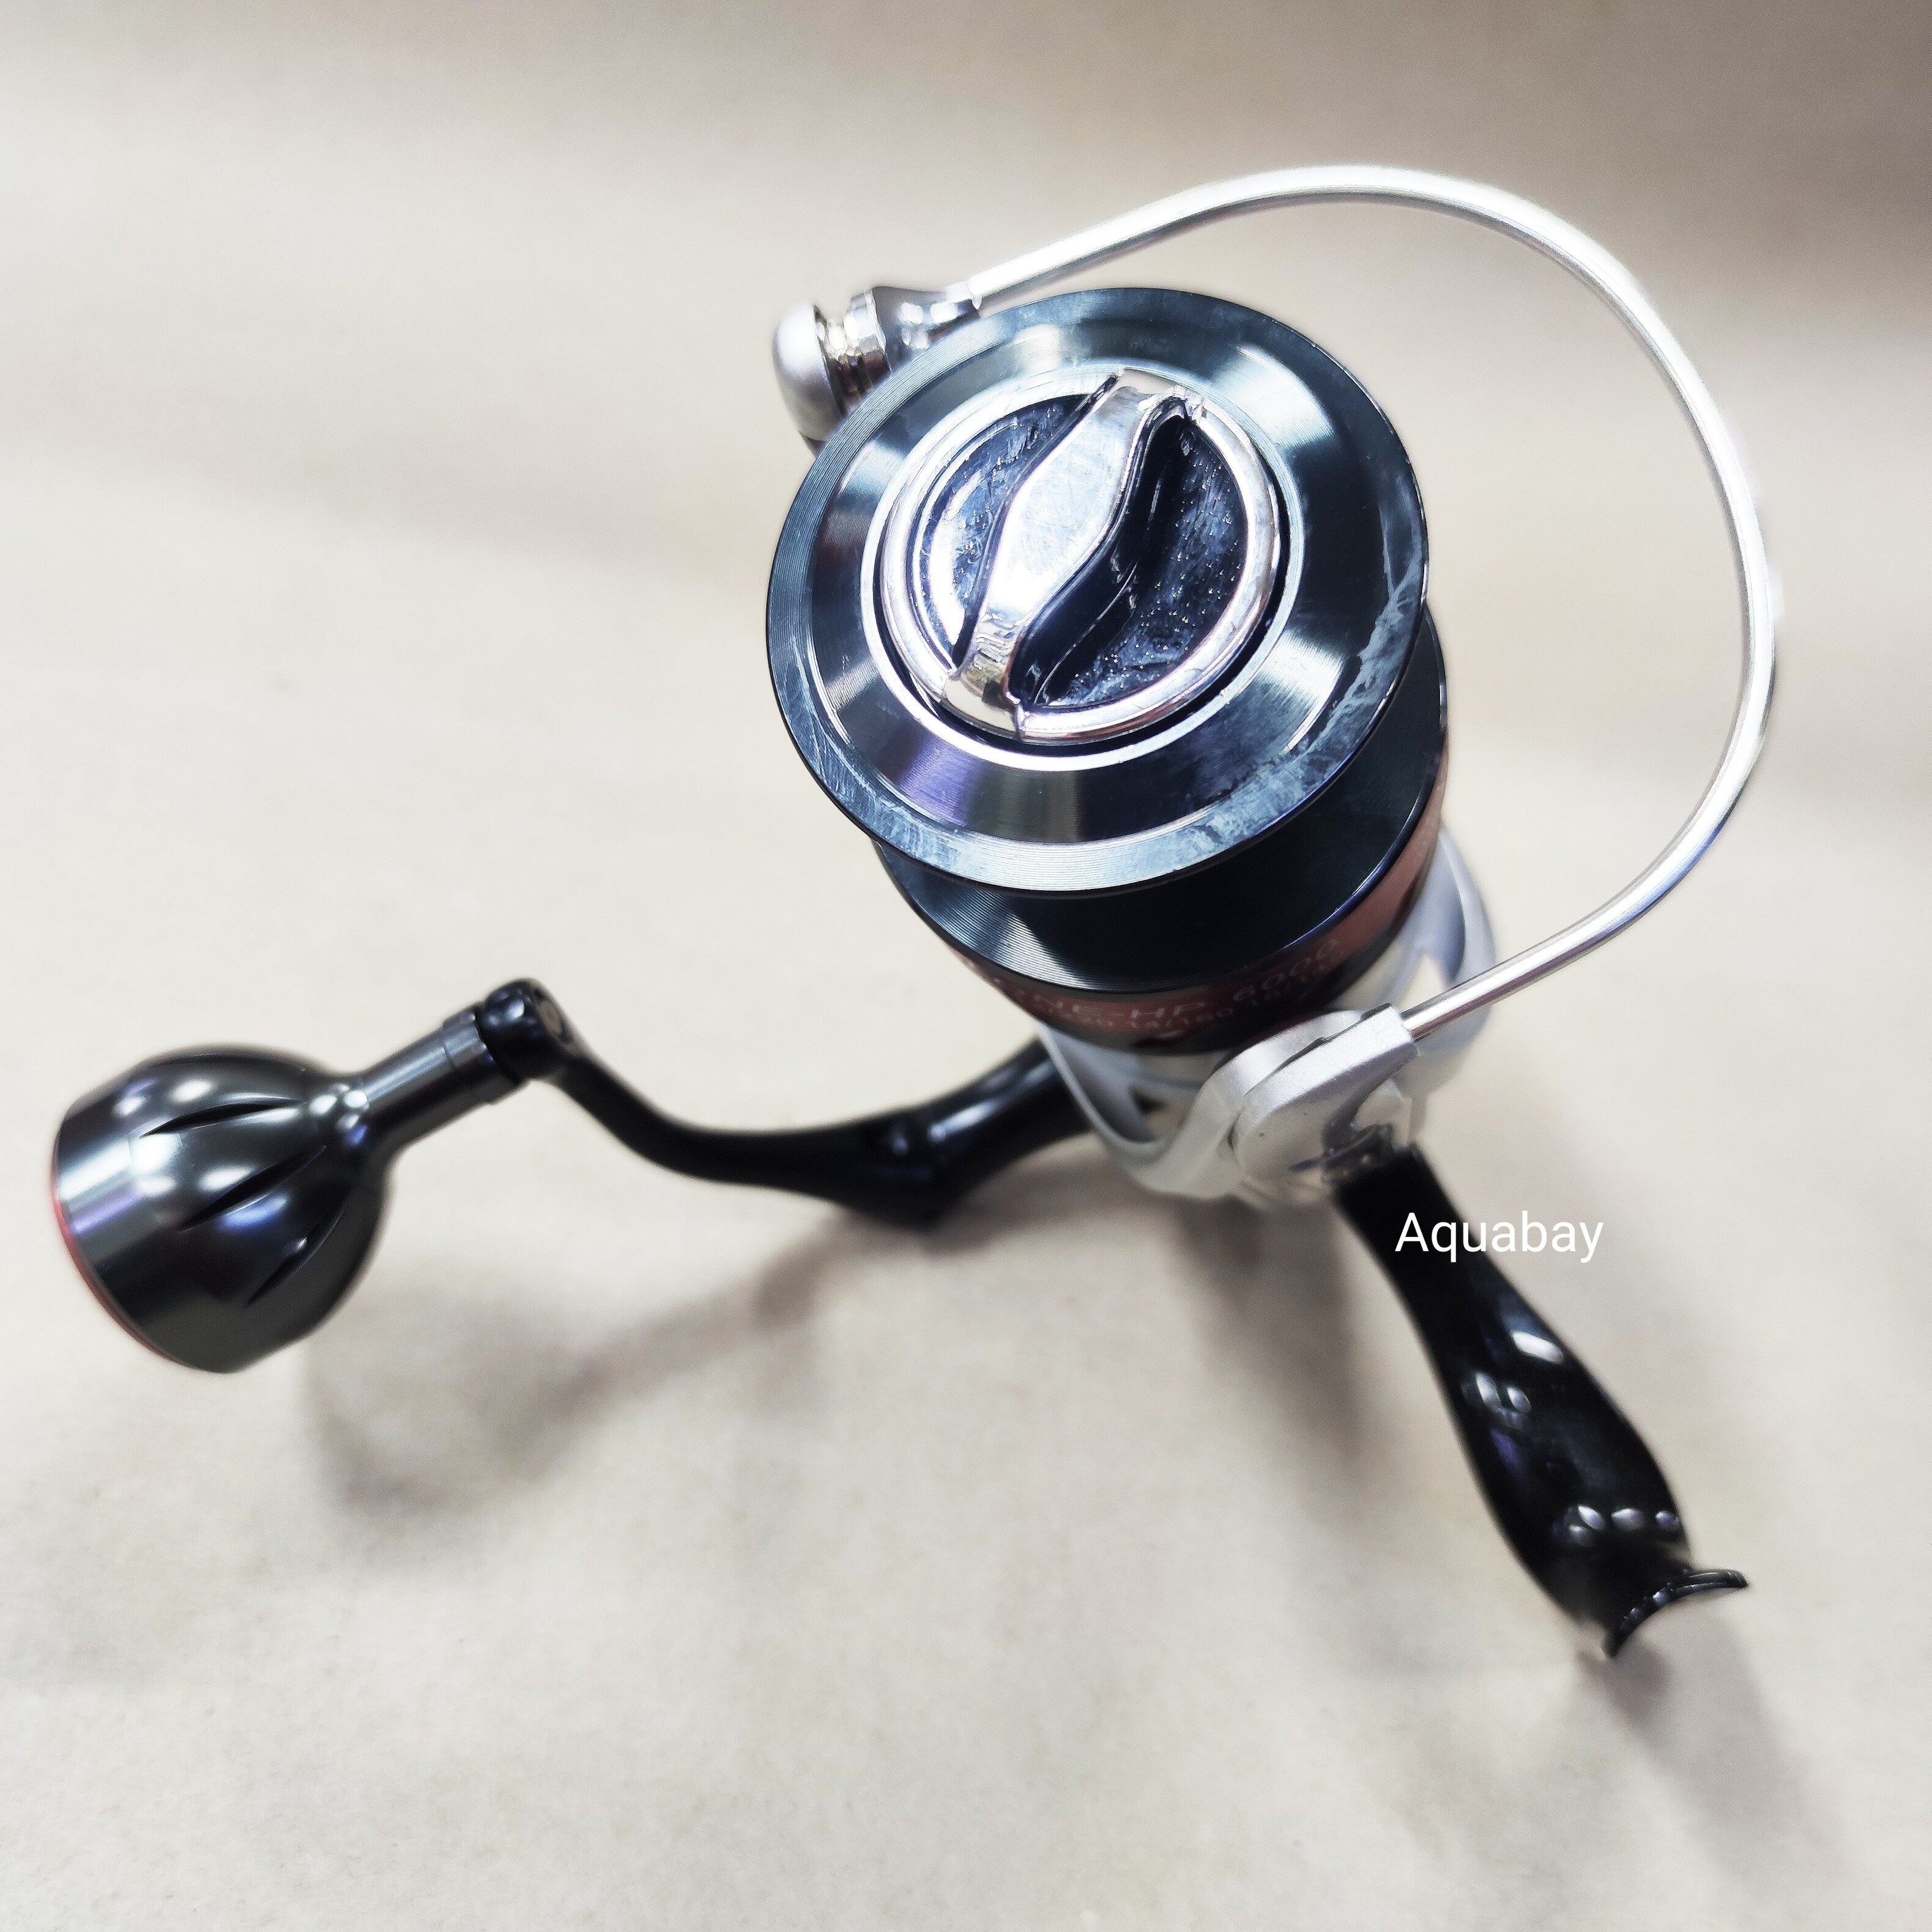 J&H Tackle - Daiwa Certate LT 5000 Spinning Reels are in